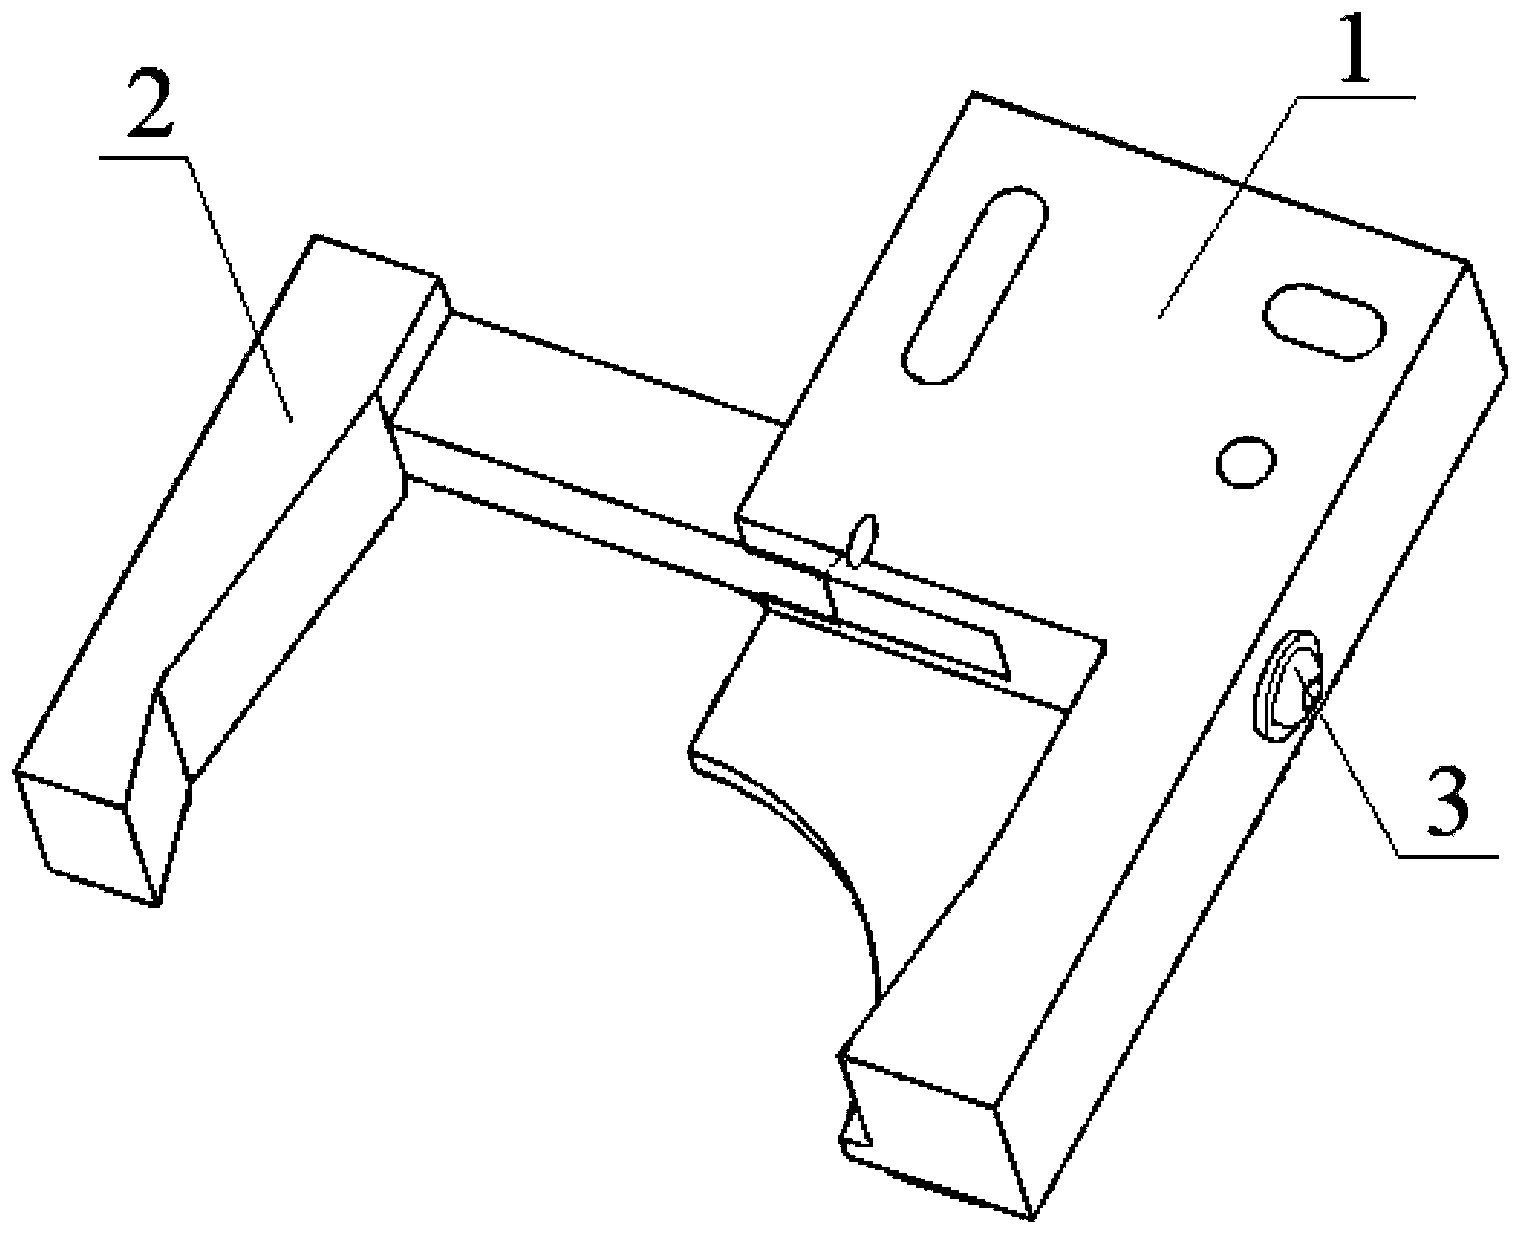 Clamp for slow wire feeding machine tool